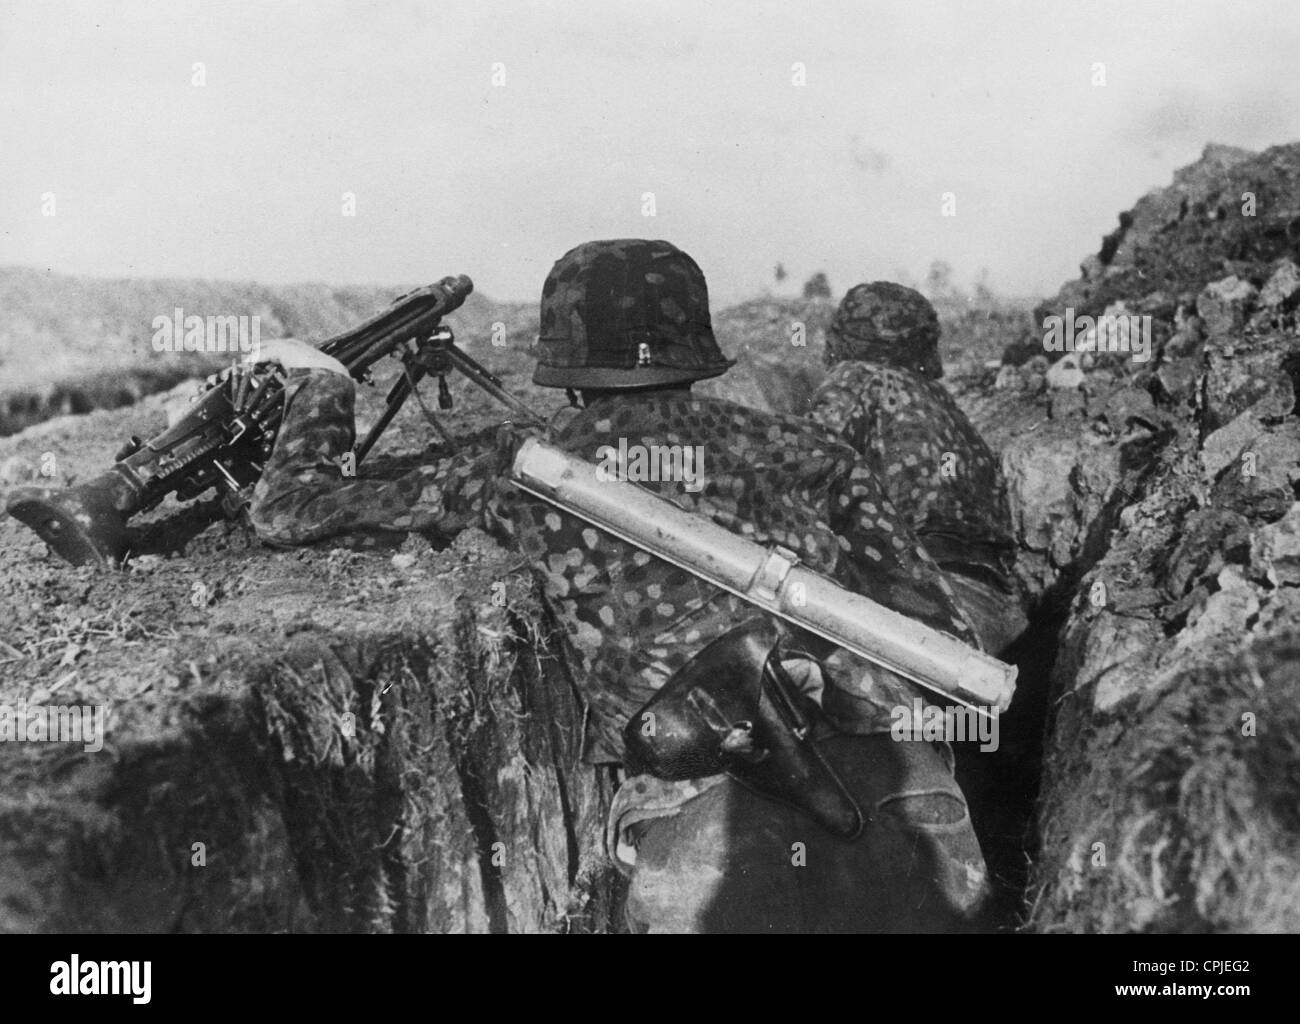 Danish soldiers of the Waffen-SS on the Eastern Front, 1944 Stock Photo